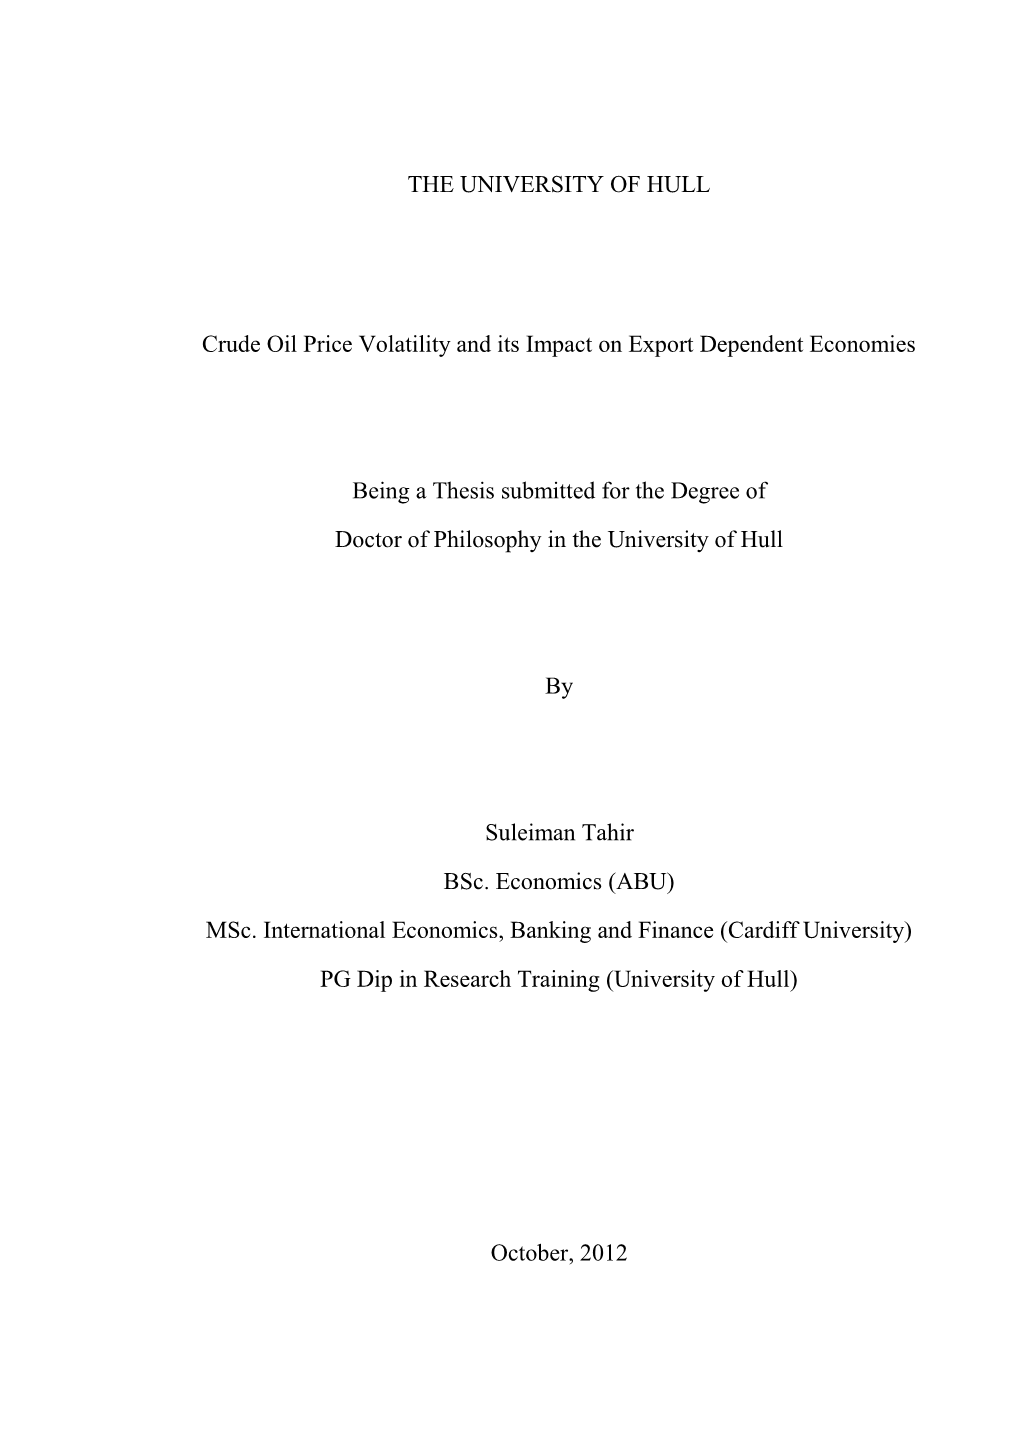 THE UNIVERSITY of HULL Crude Oil Price Volatility and Its Impact On